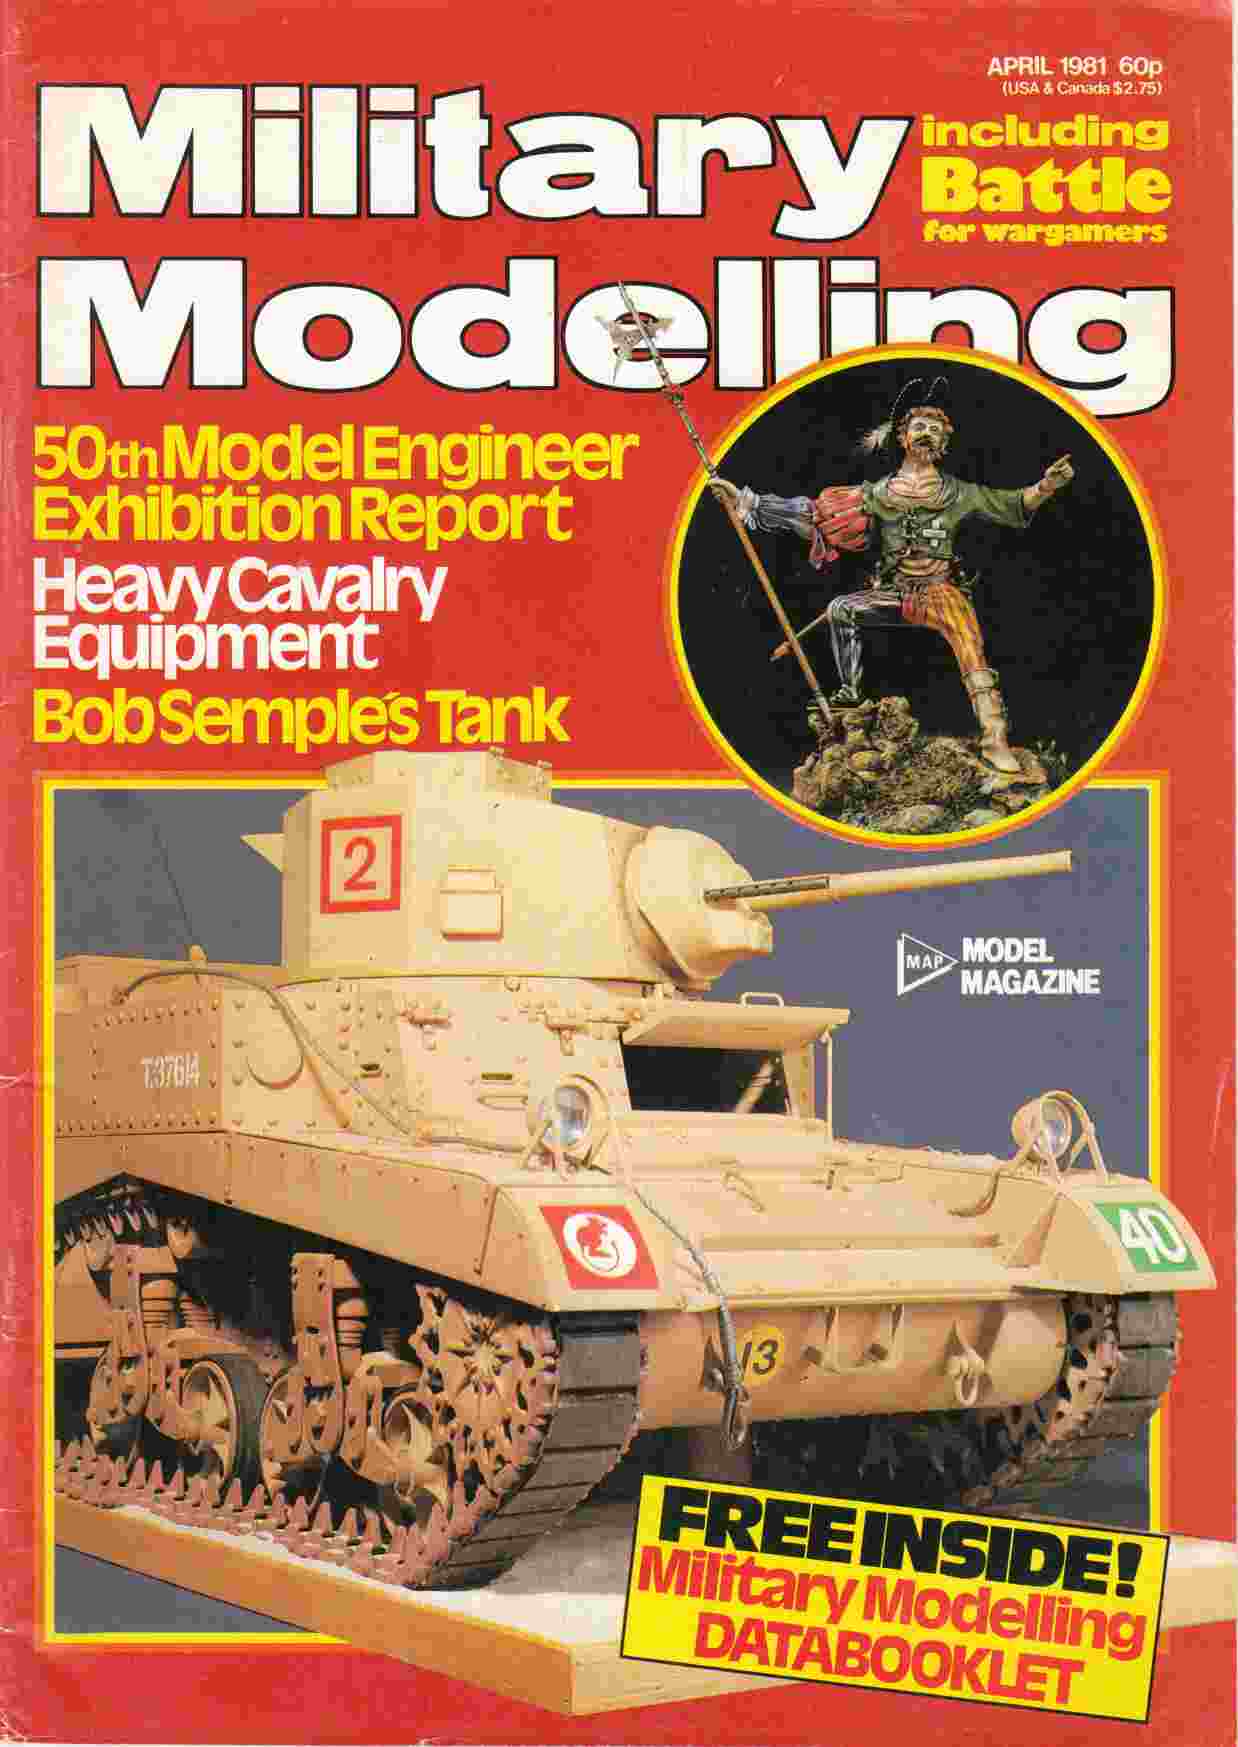 Image for Military Modelling Vol. 11 No. 4 April 1981